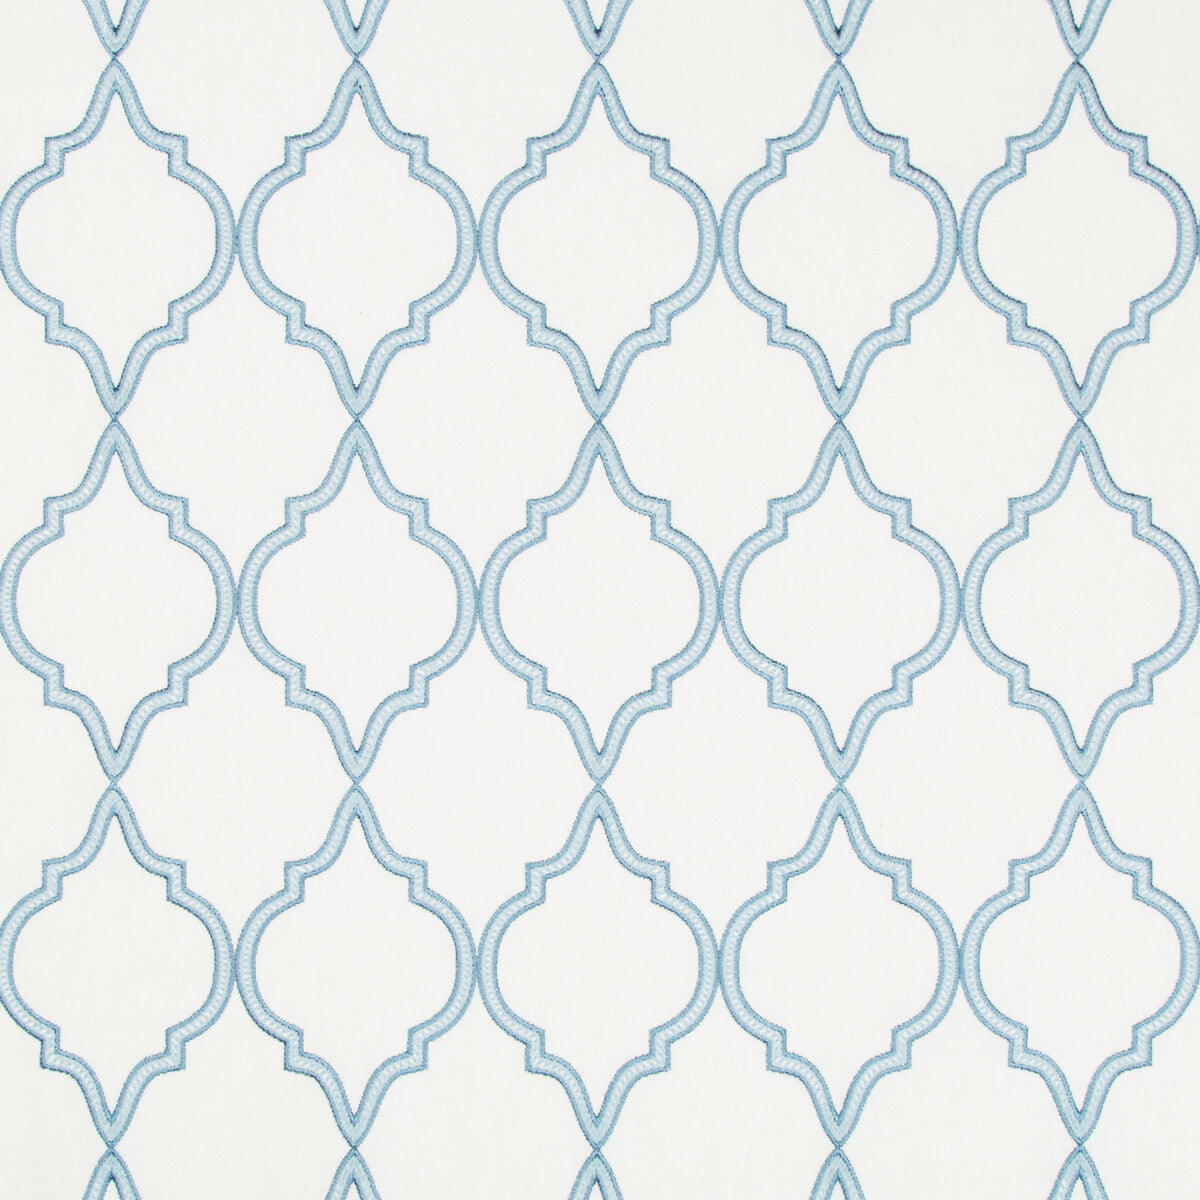 Highhope fabric in chambray color - pattern 35301.15.0 - by Kravet Basics in the Greenwich collection